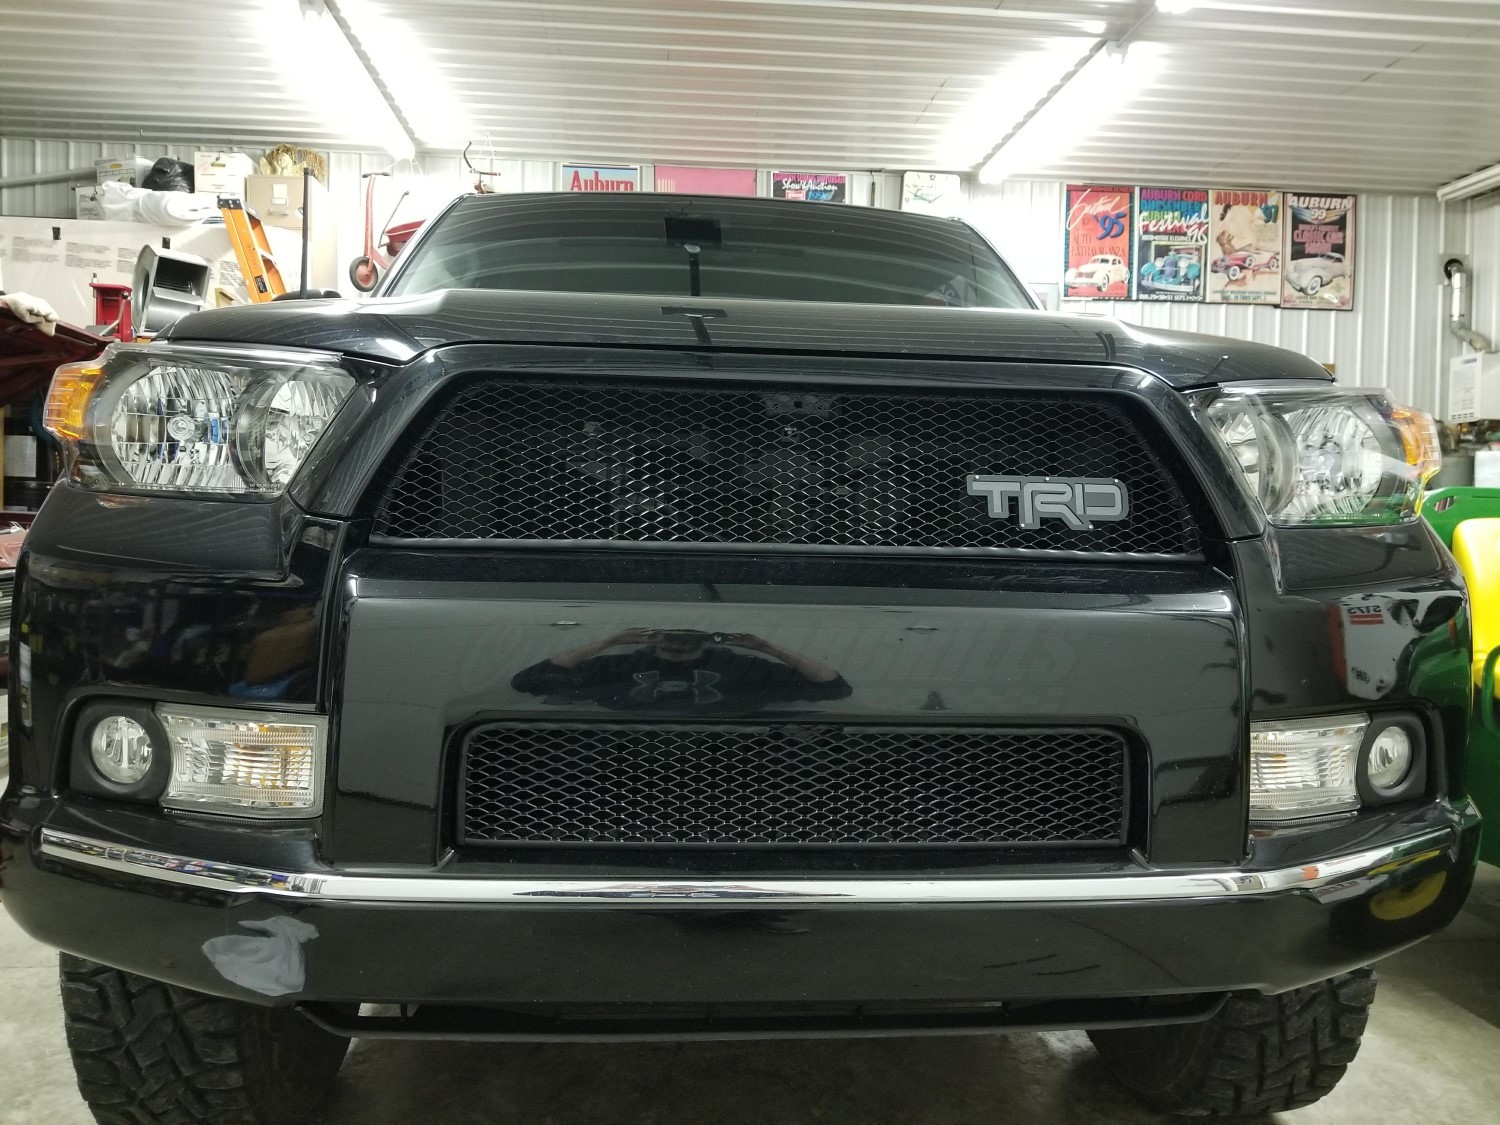 2010 - 2013 Toyota 4Runner Grill Mesh and TRD Emblem #2